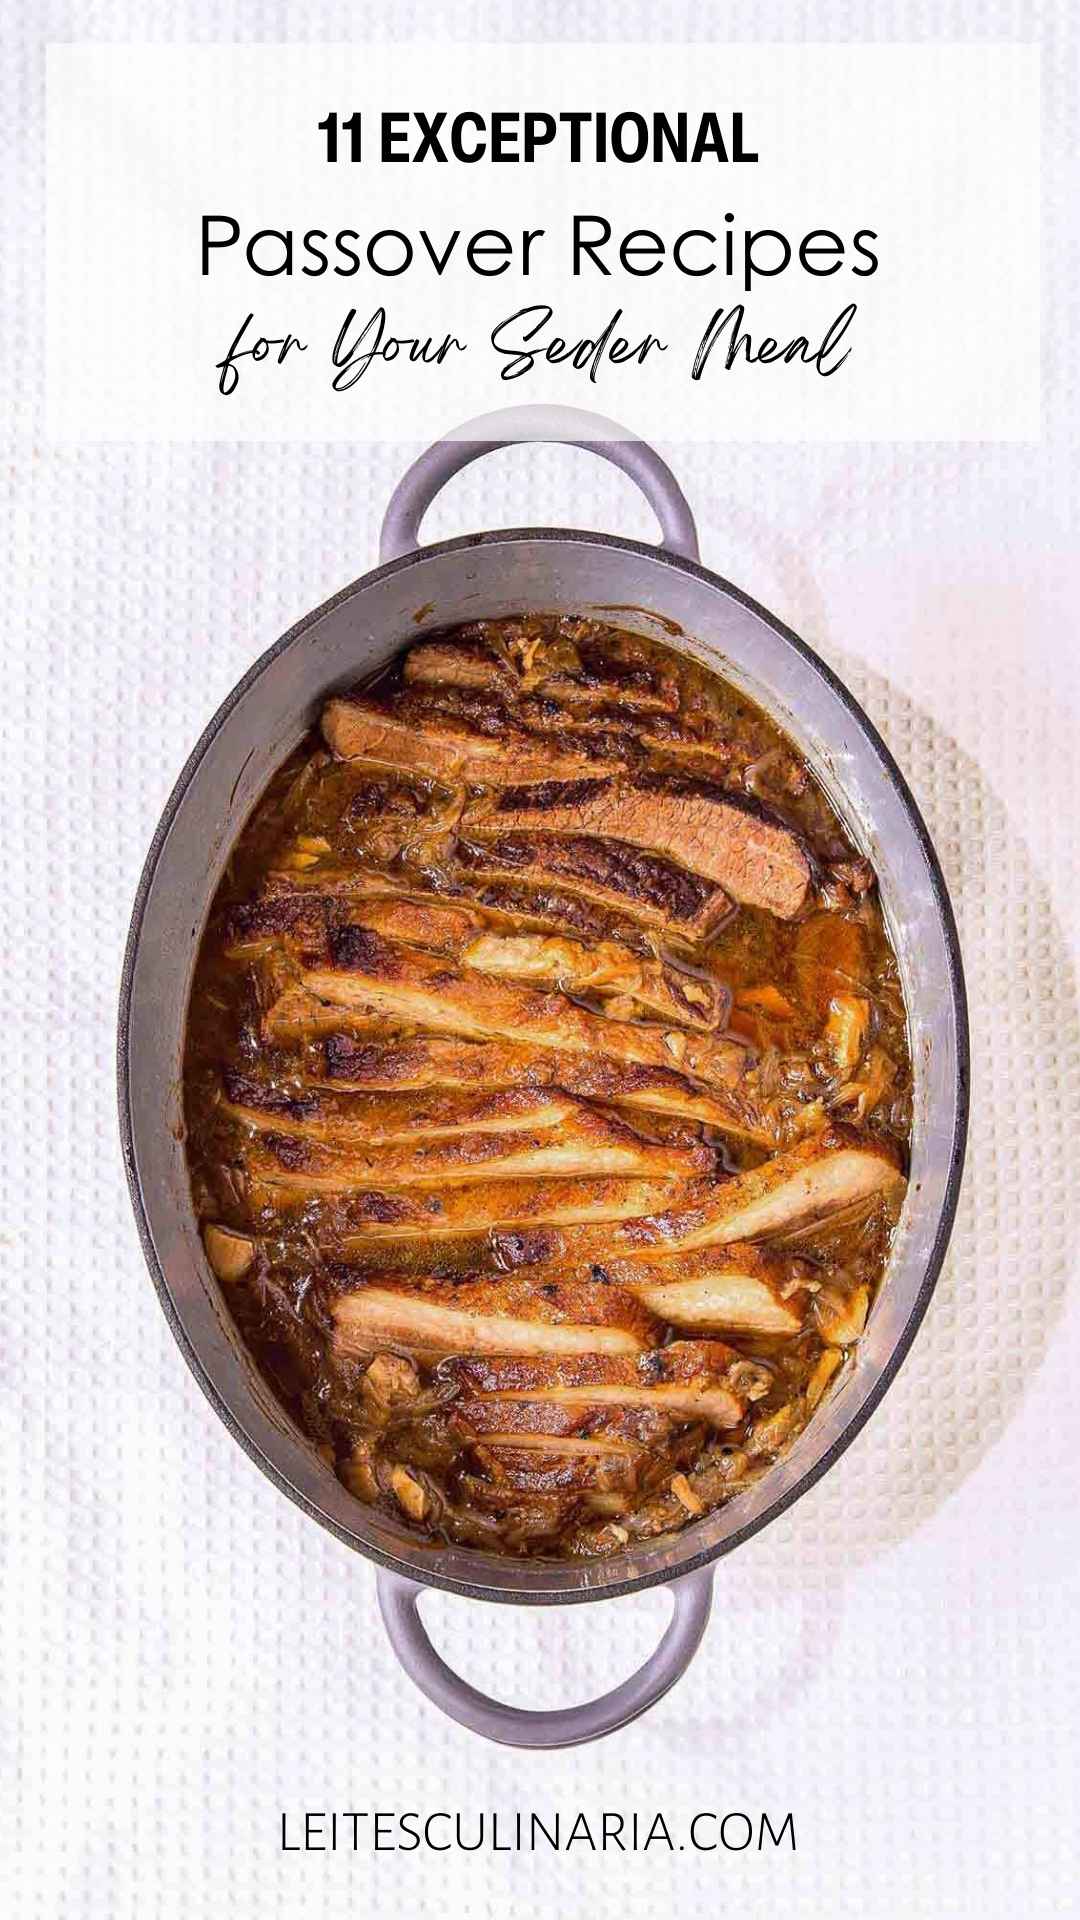 A sliced brisket in an oval Dutch oven.